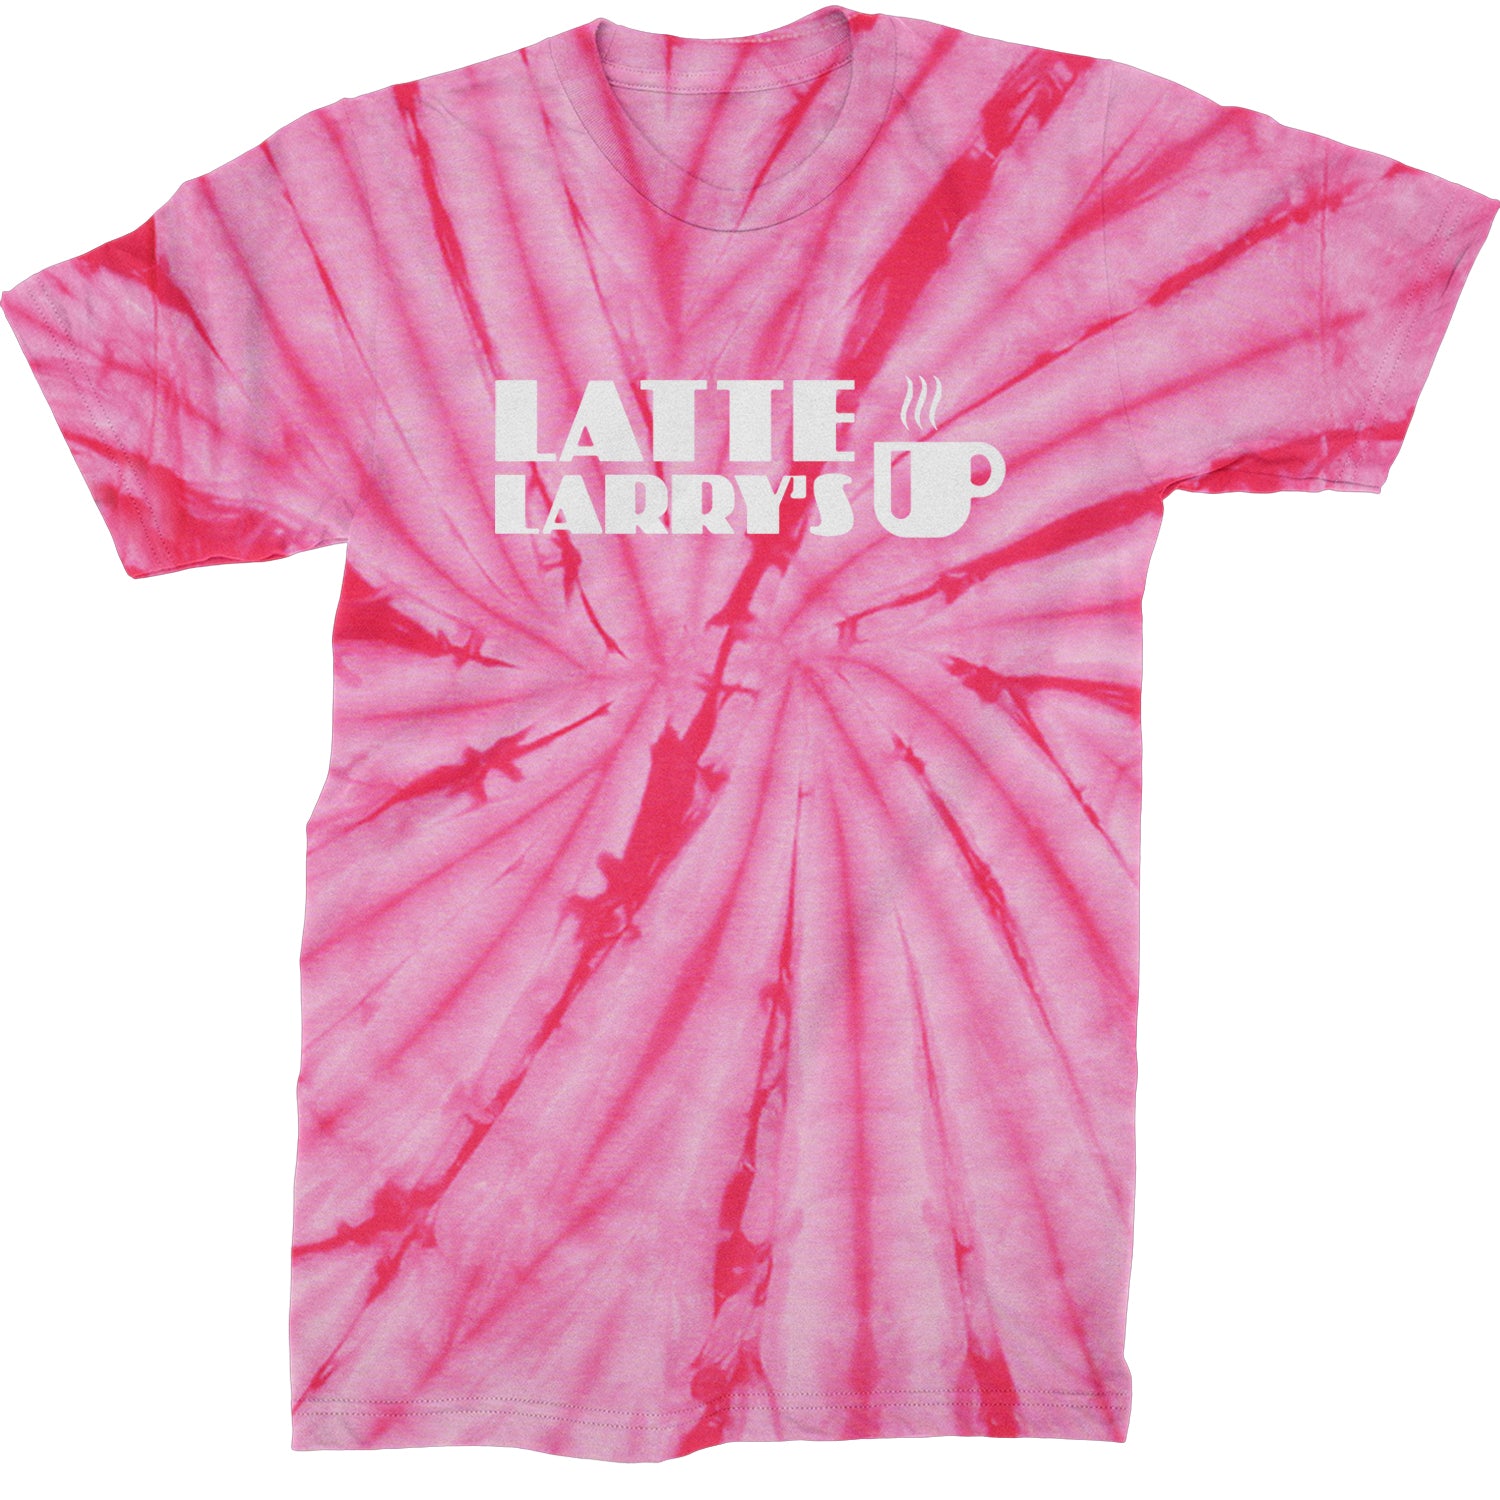 Latte Larry's Enthusiastic Coffee Mens T-shirt Tie-Dye Spider Pink